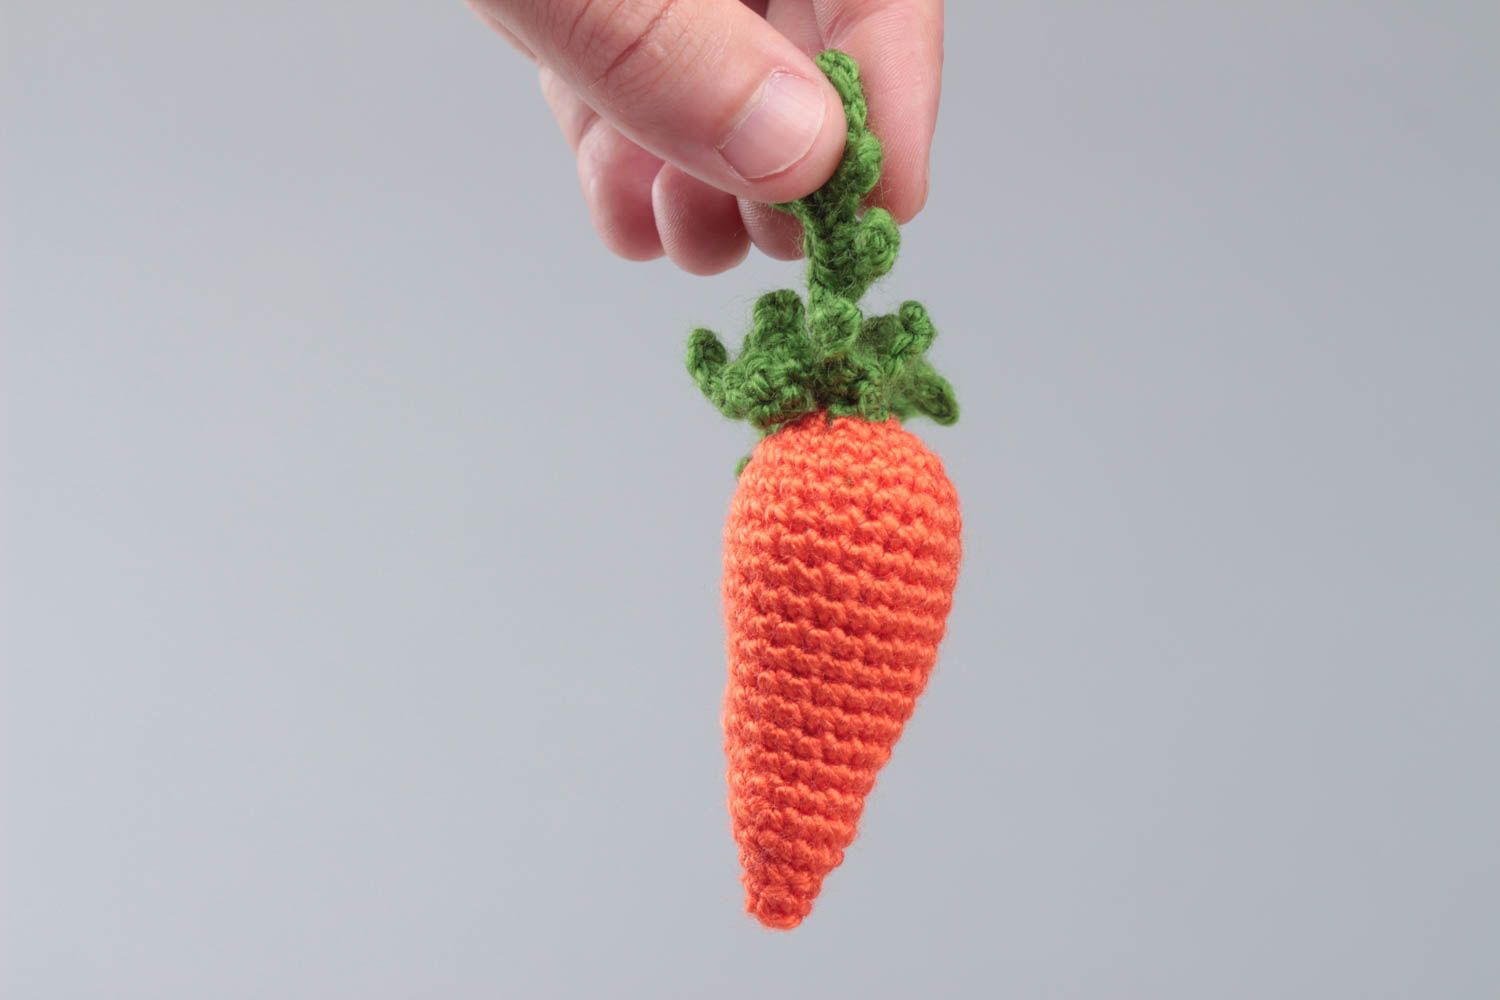 Handmade small acrylic crochet soft toy orange carrot for kids and kitchen decor photo 5